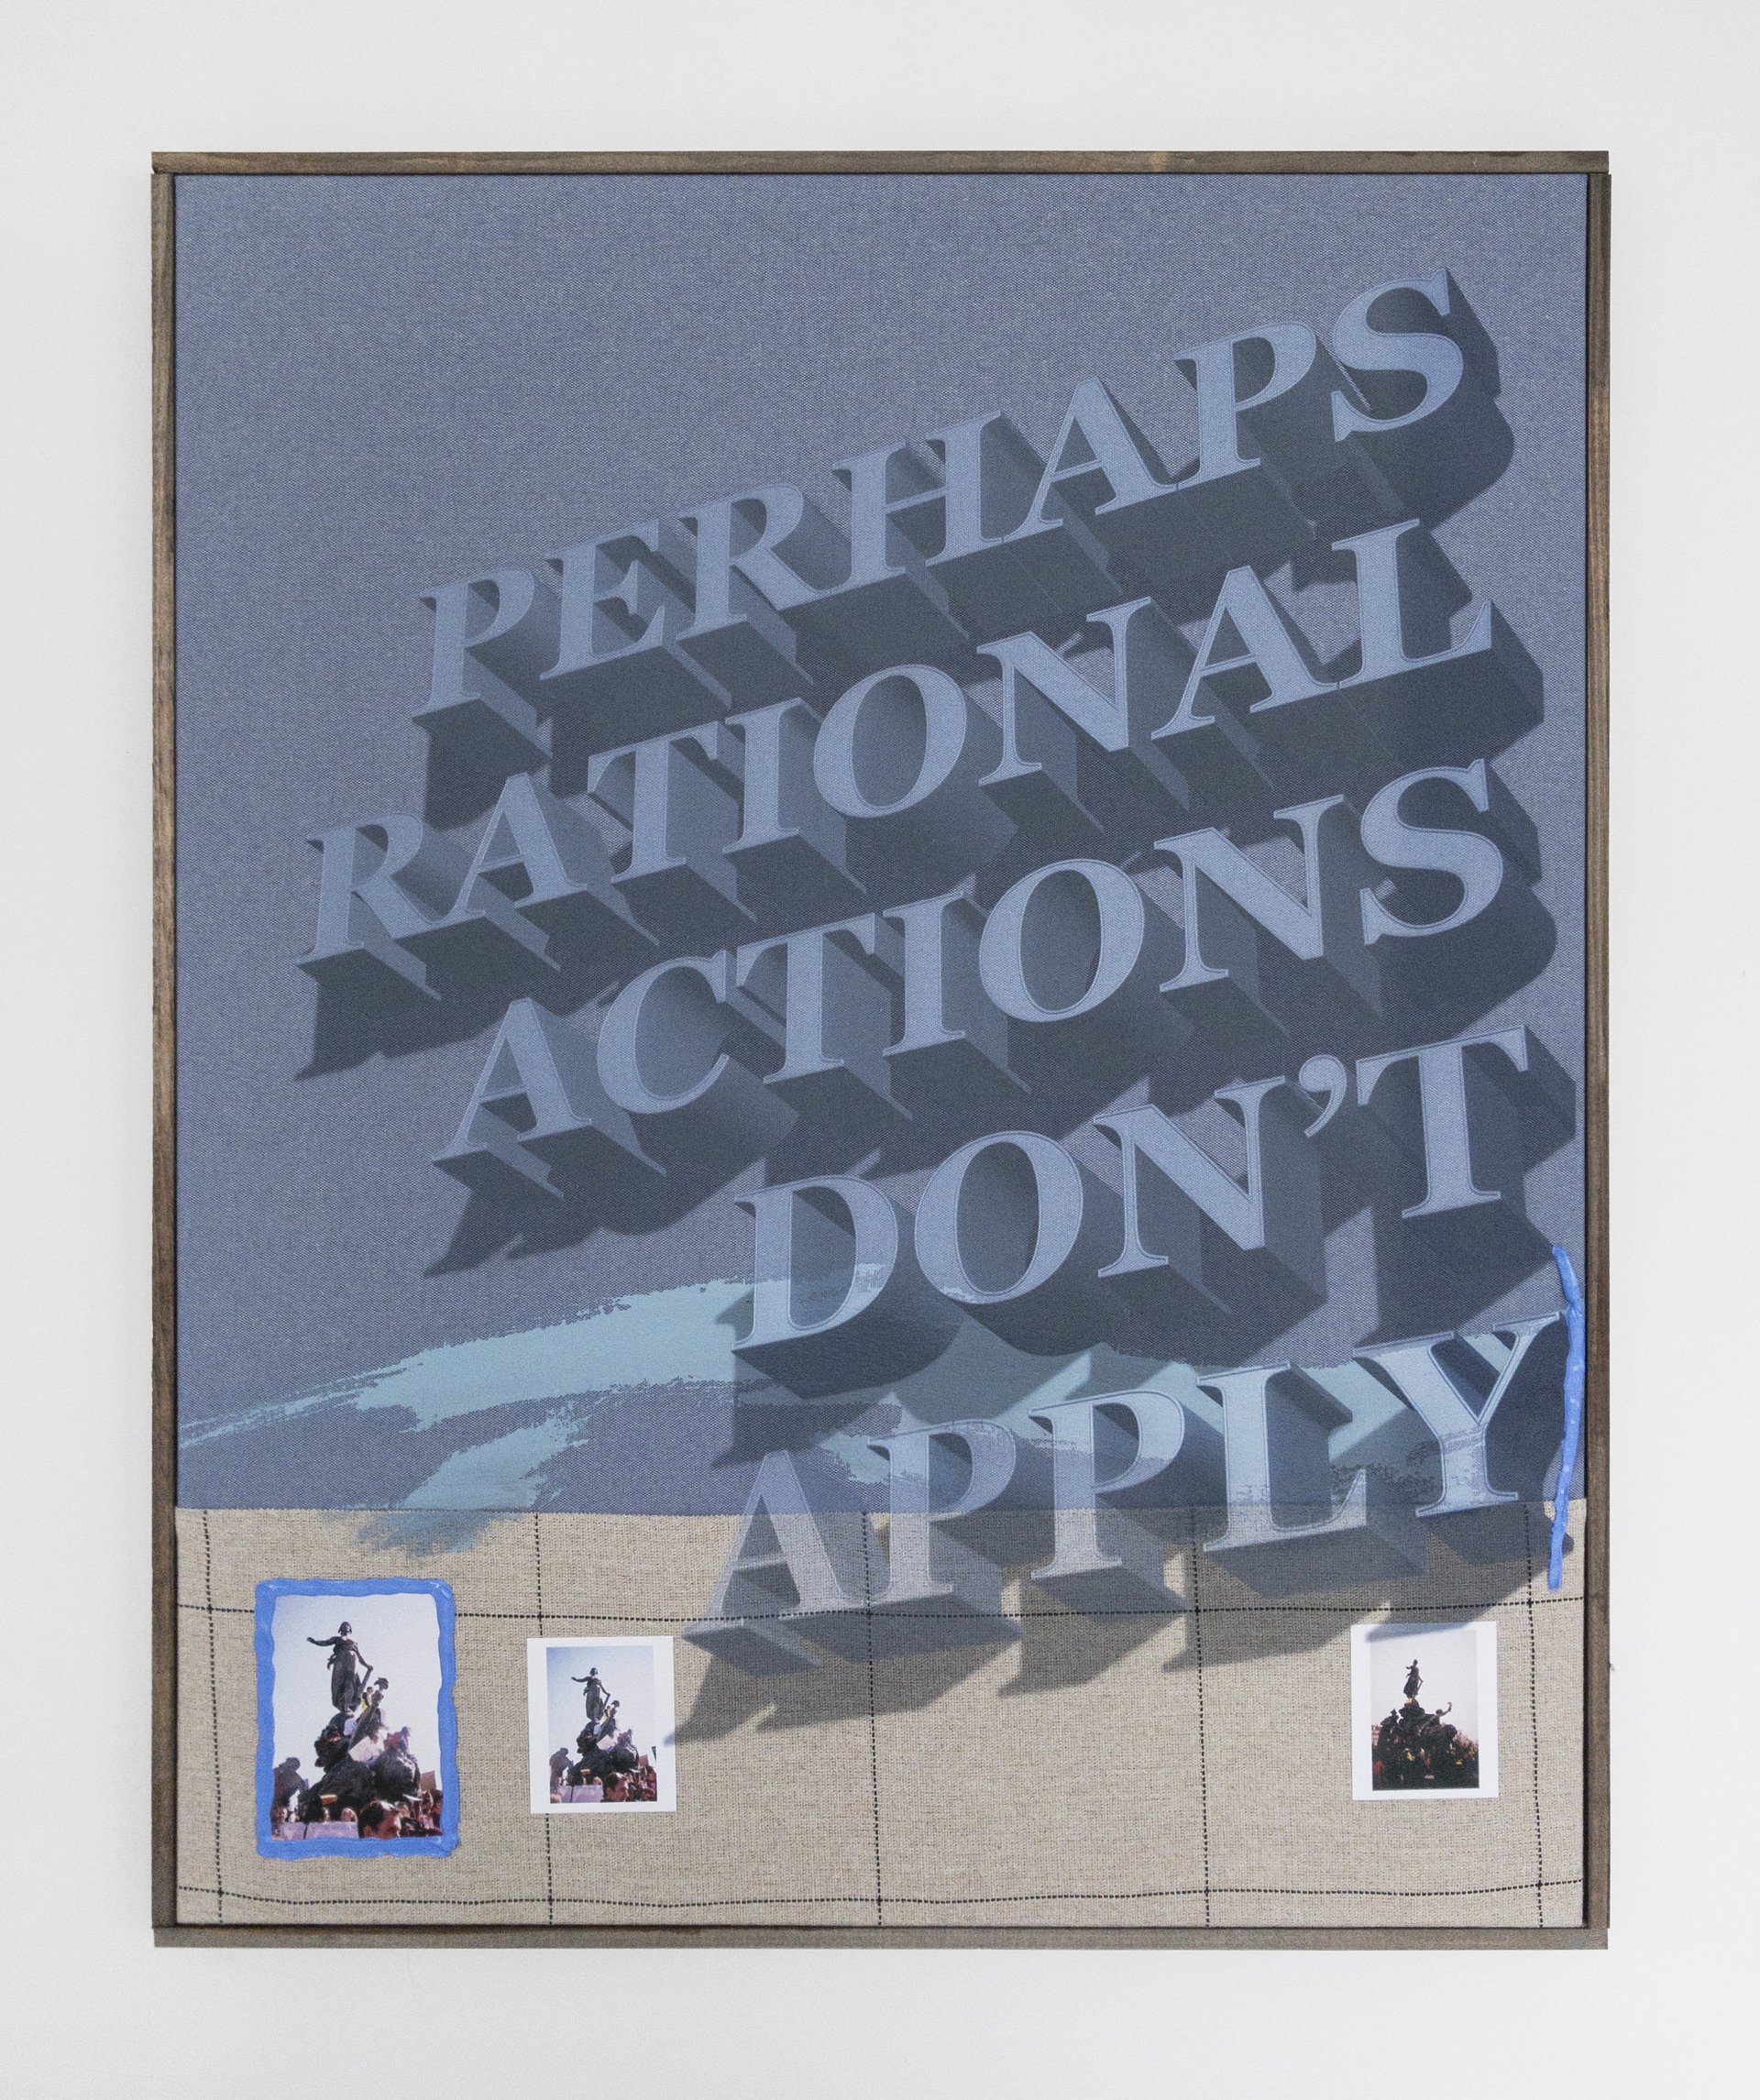 Philipp TimischlPerhaps Rational Actions Don’t Apply, 2020Acrylic paint, UV-direct print and photos on fabrics, stained wooden frame100 x 80 cm